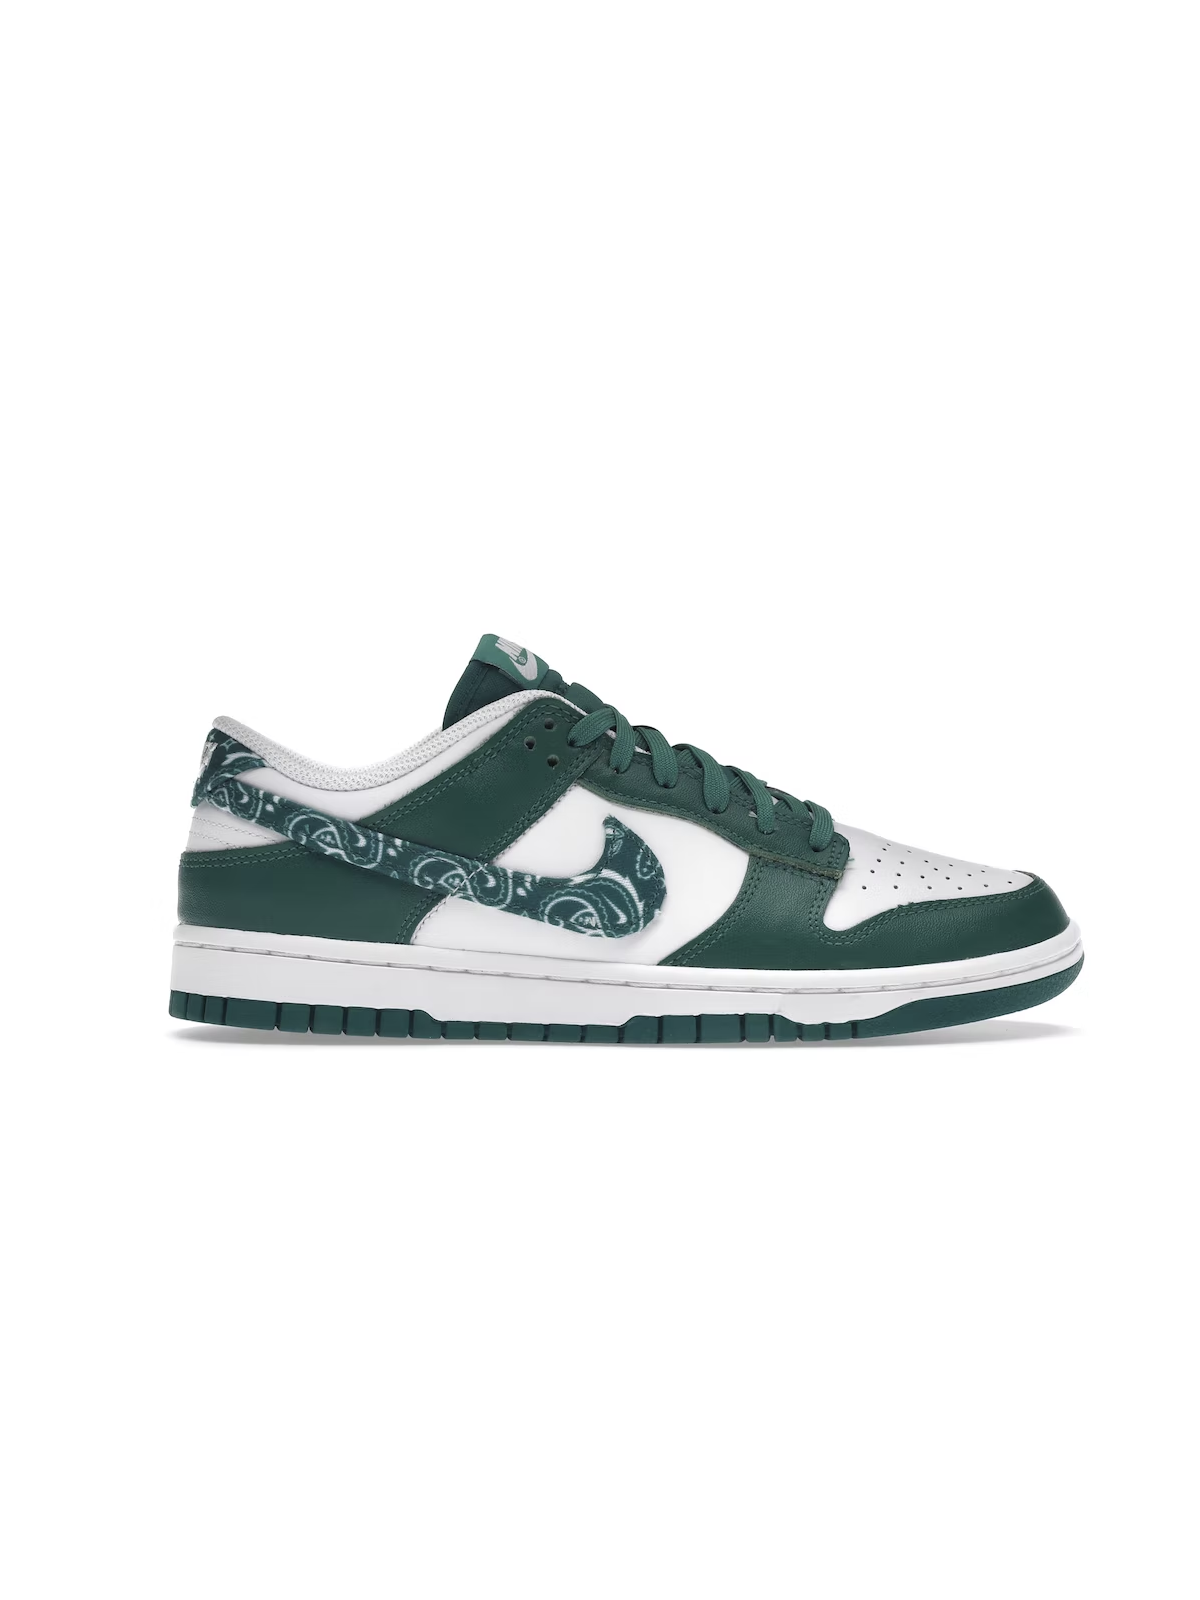 Nike Dunk Low Essential Paisley Pack Green